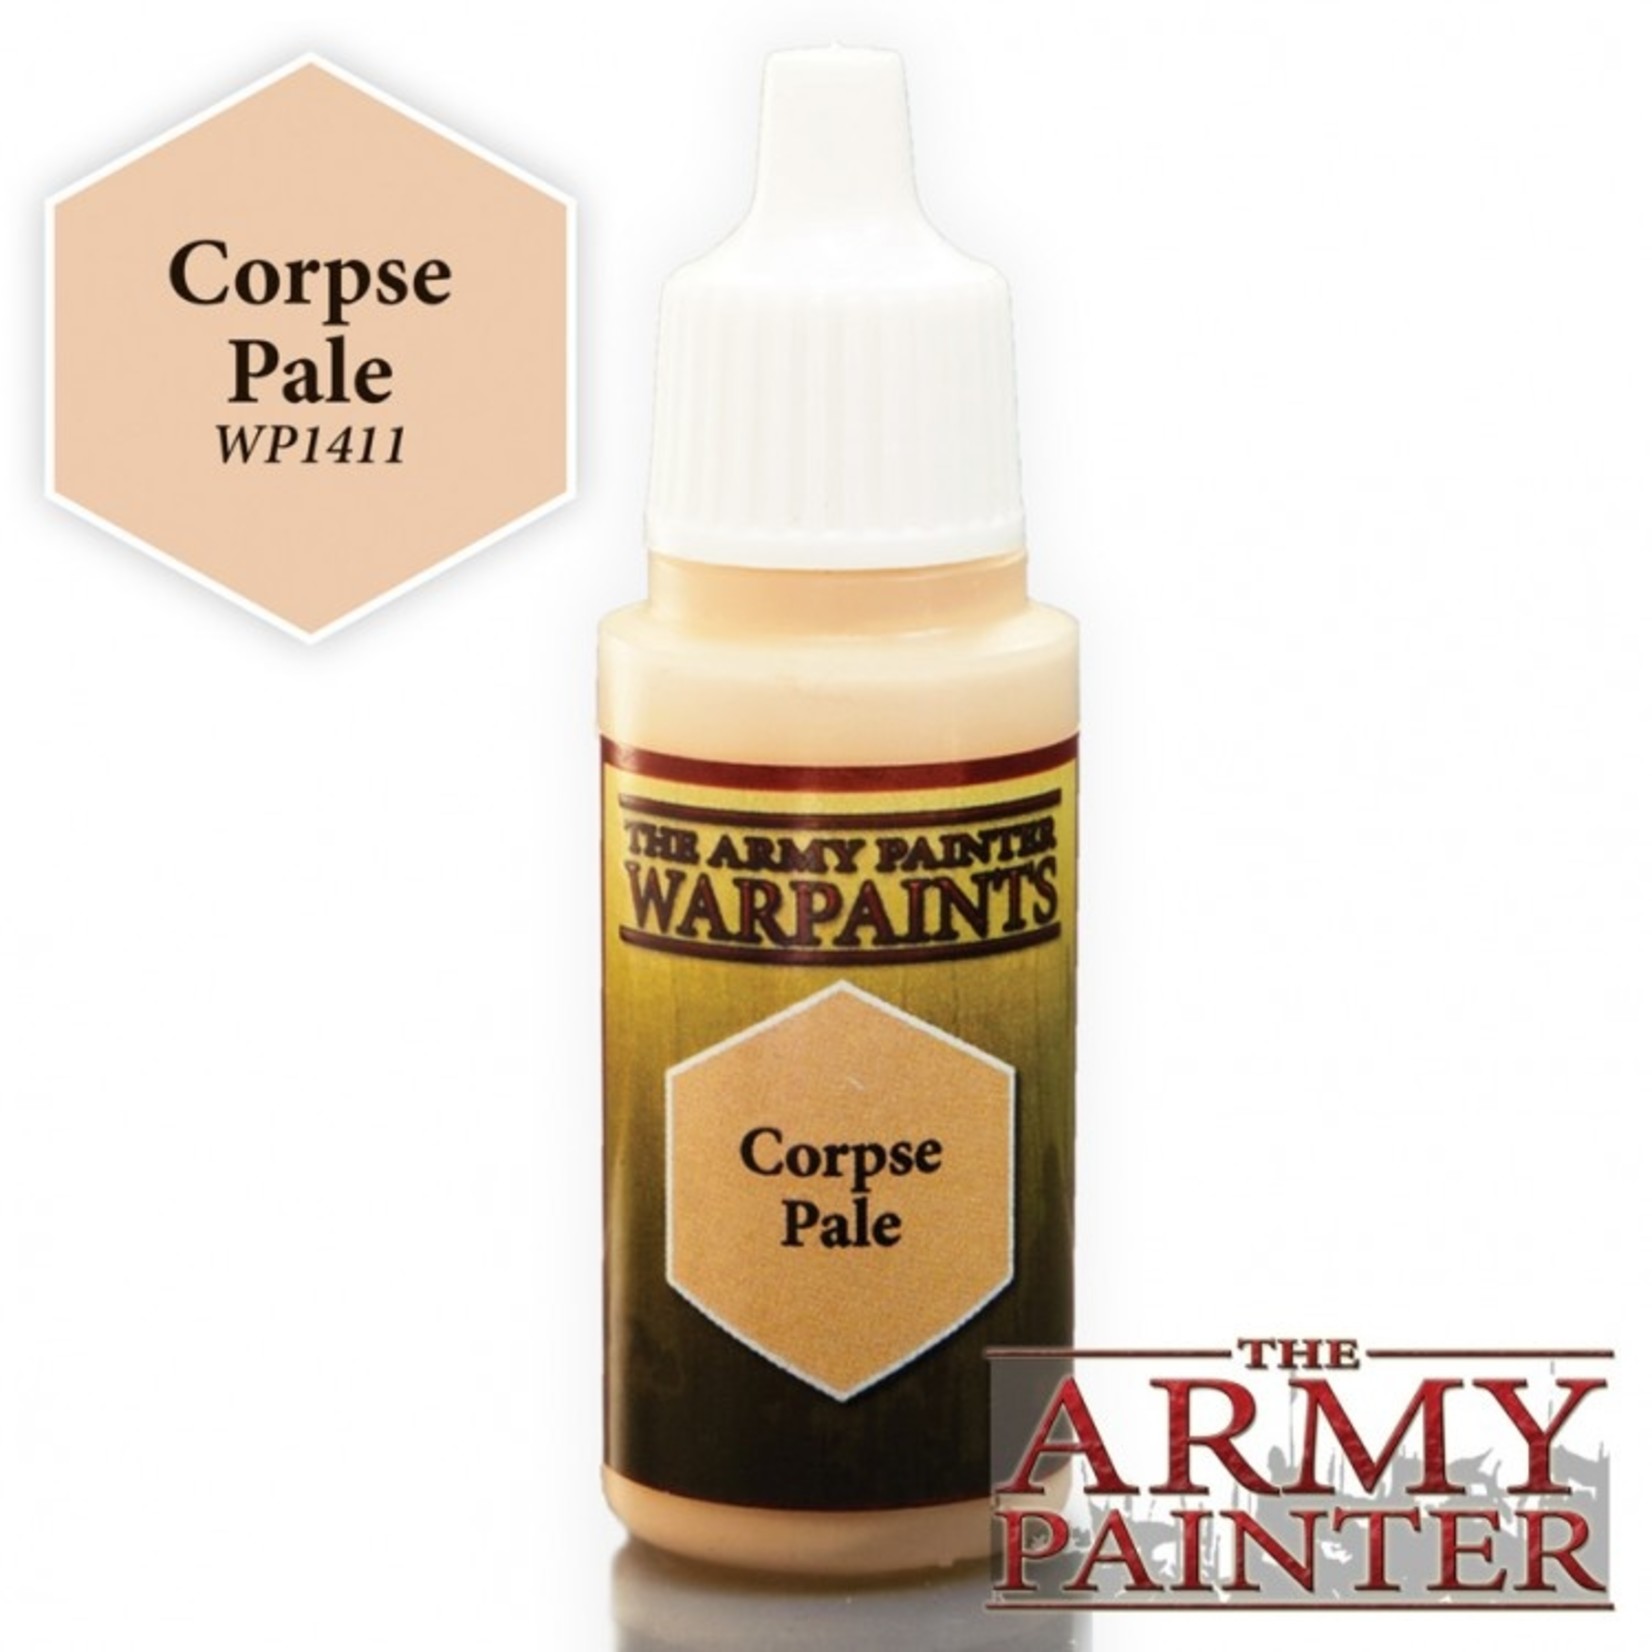 The Army Painter The Army Painter Corpse Pale 18ml